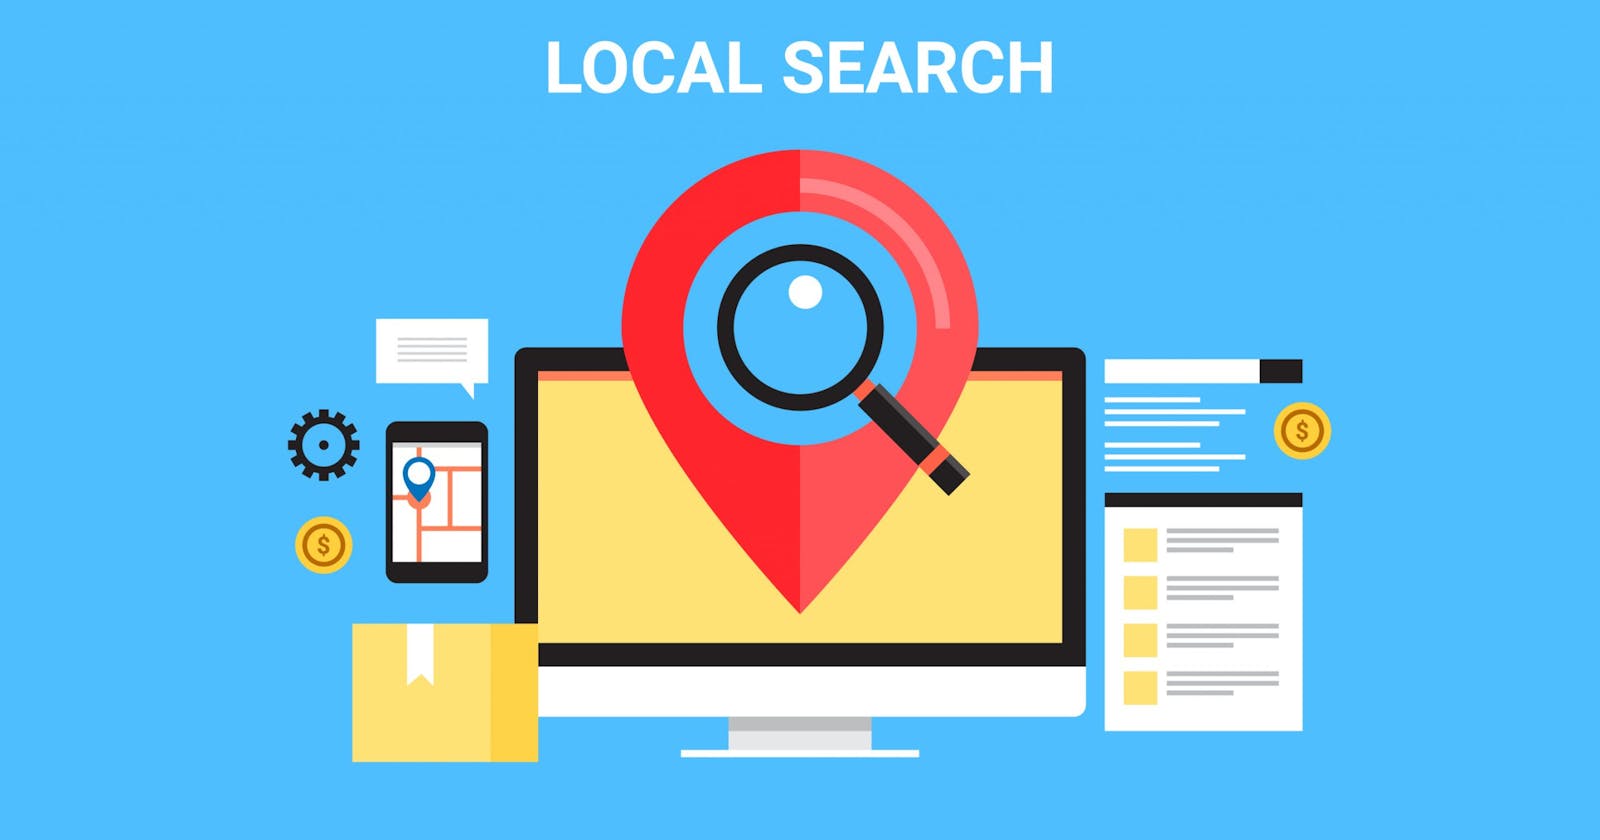 Tips to optimize your website for local search